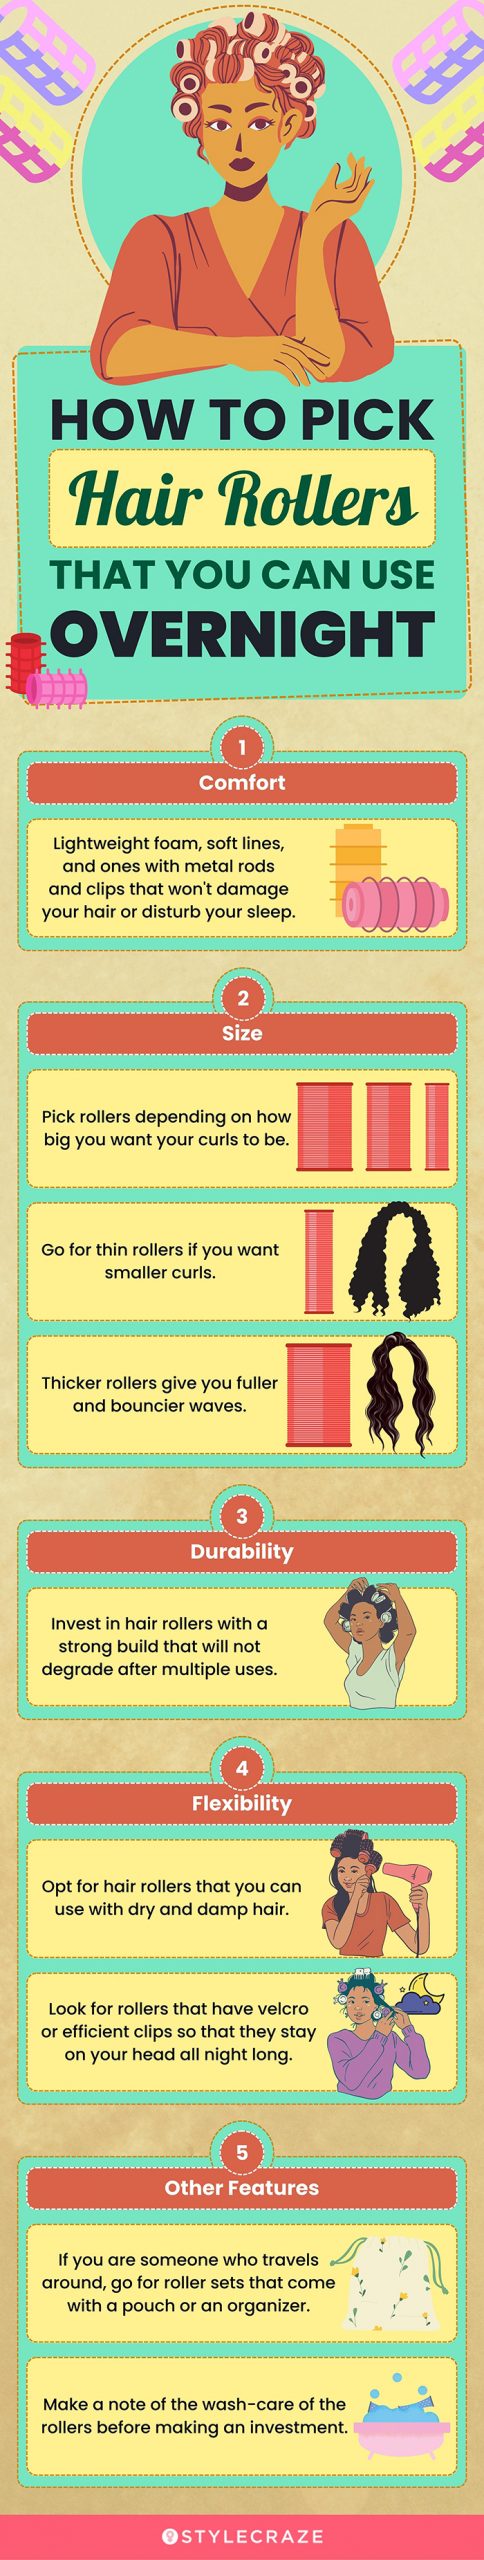 How To Pick Hair Rollers That You Can Use Overnight (infographic)